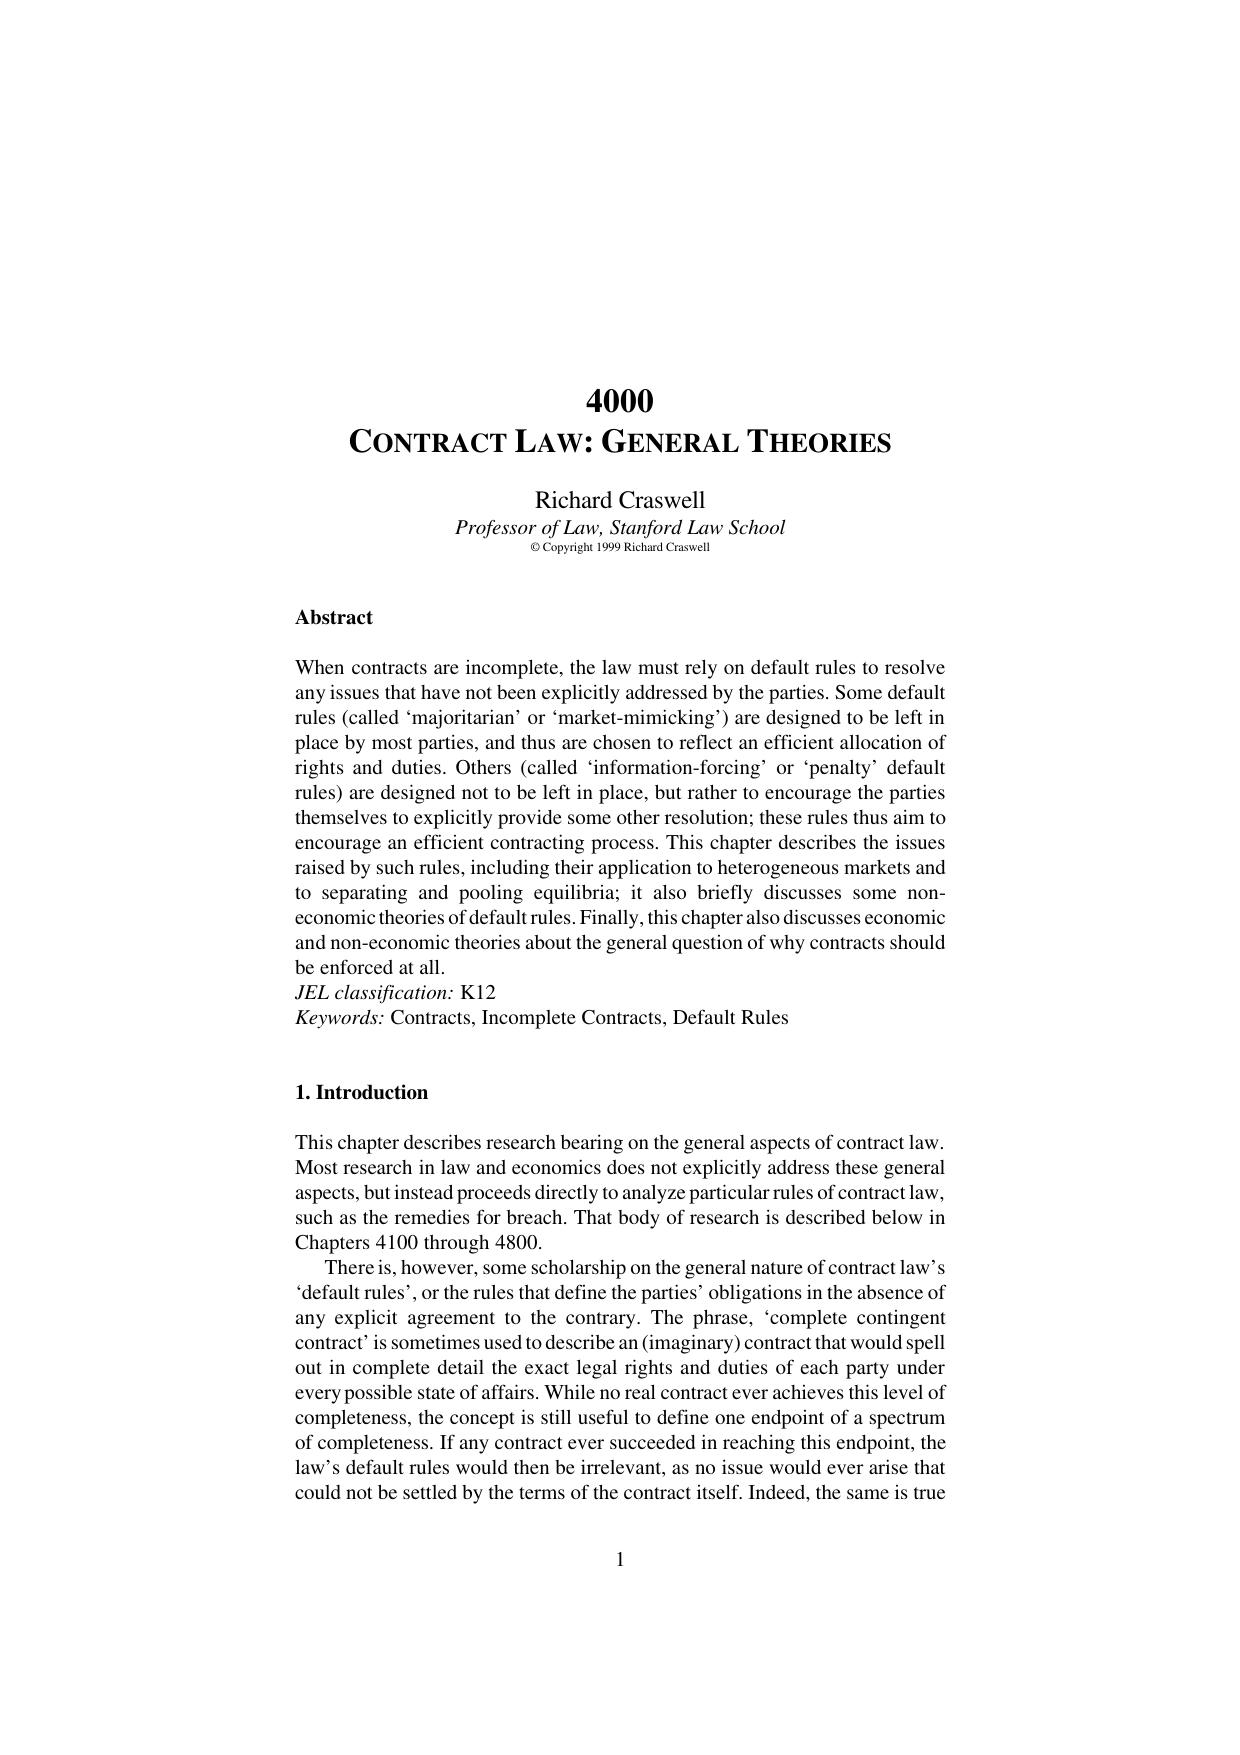 Contract Law: General Theories - Paper